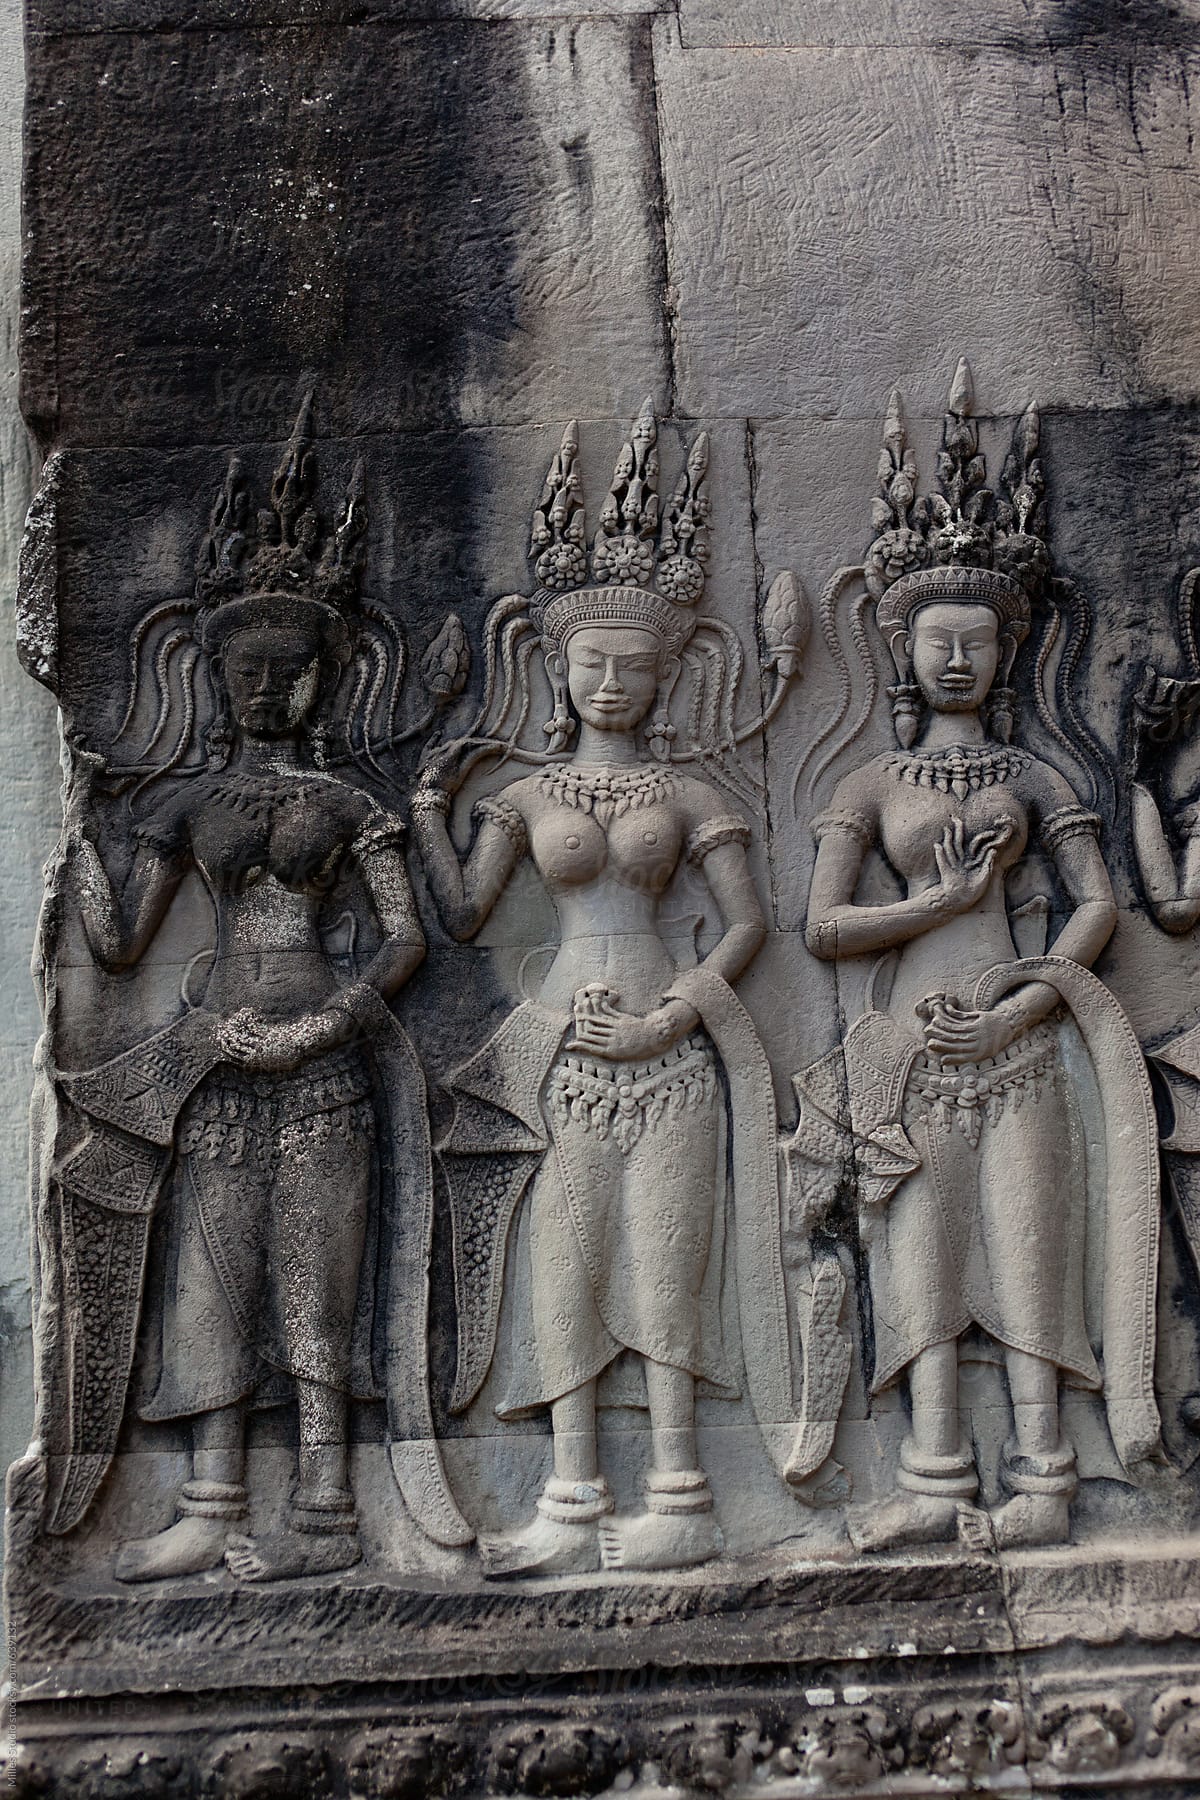 Cambodia Culture Images - Search Images on Everypixel